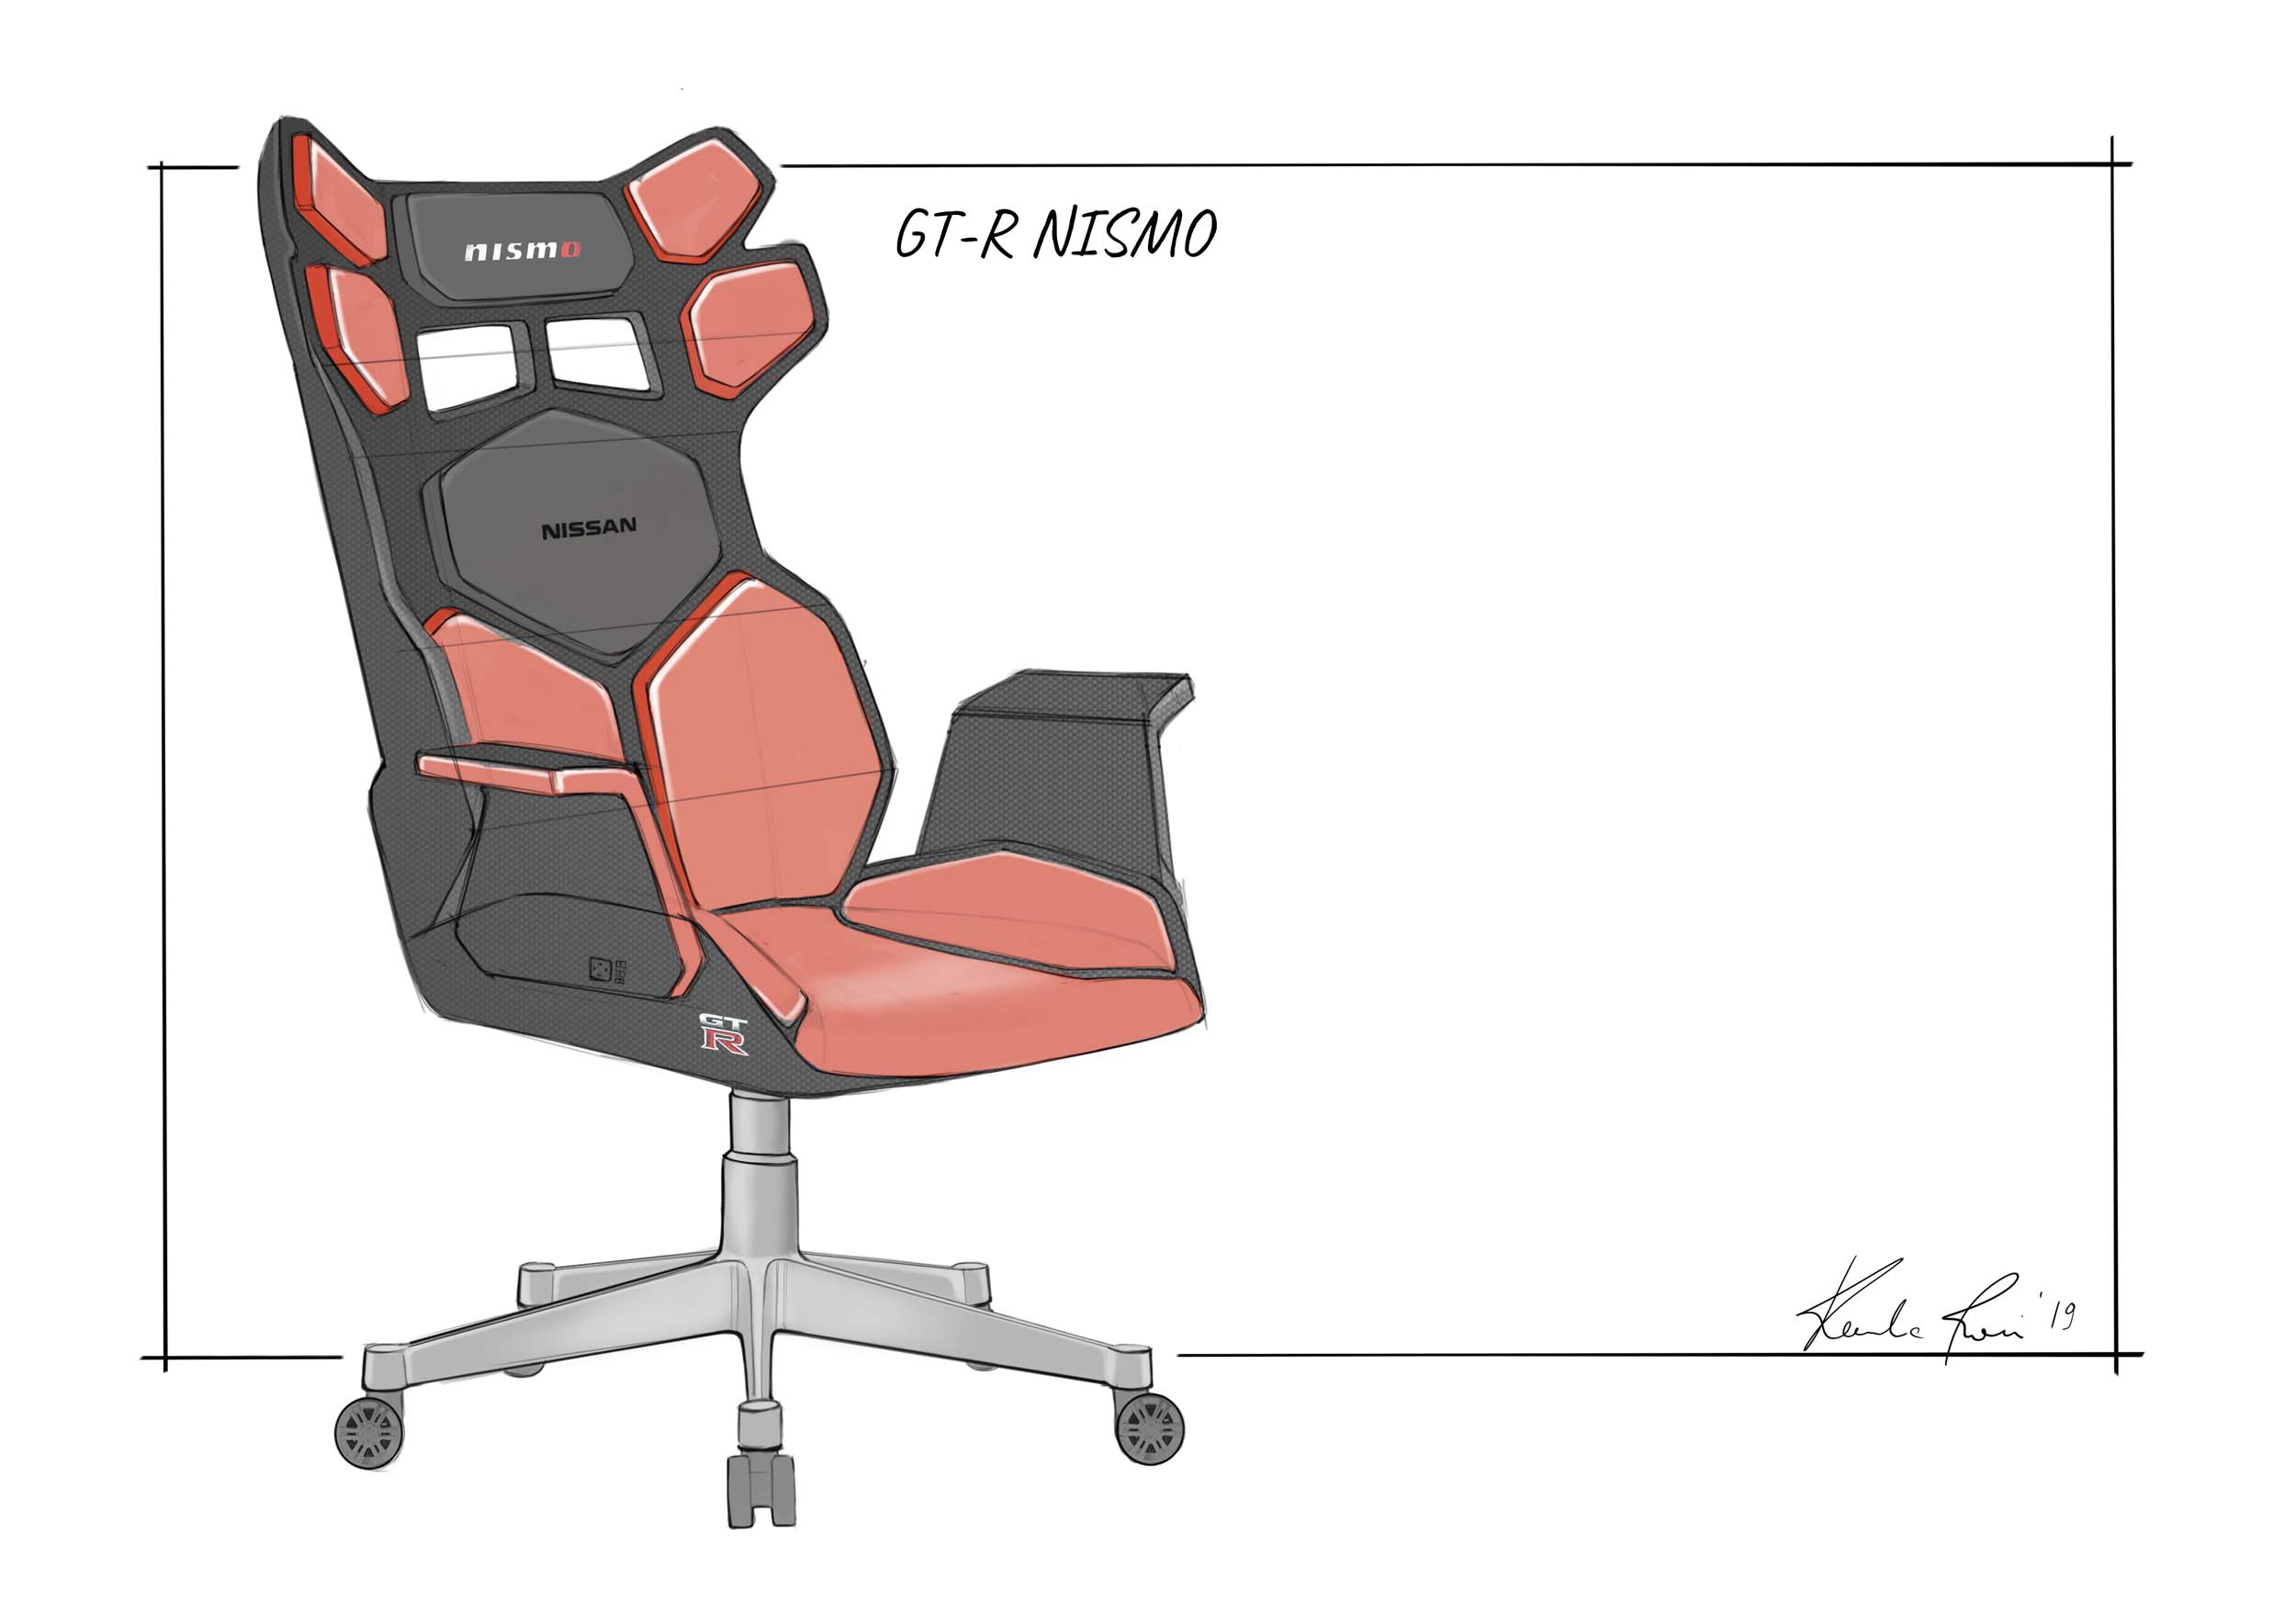 Ultimate-esports-gaming-chairs-Nissan-GT-R-NISMO